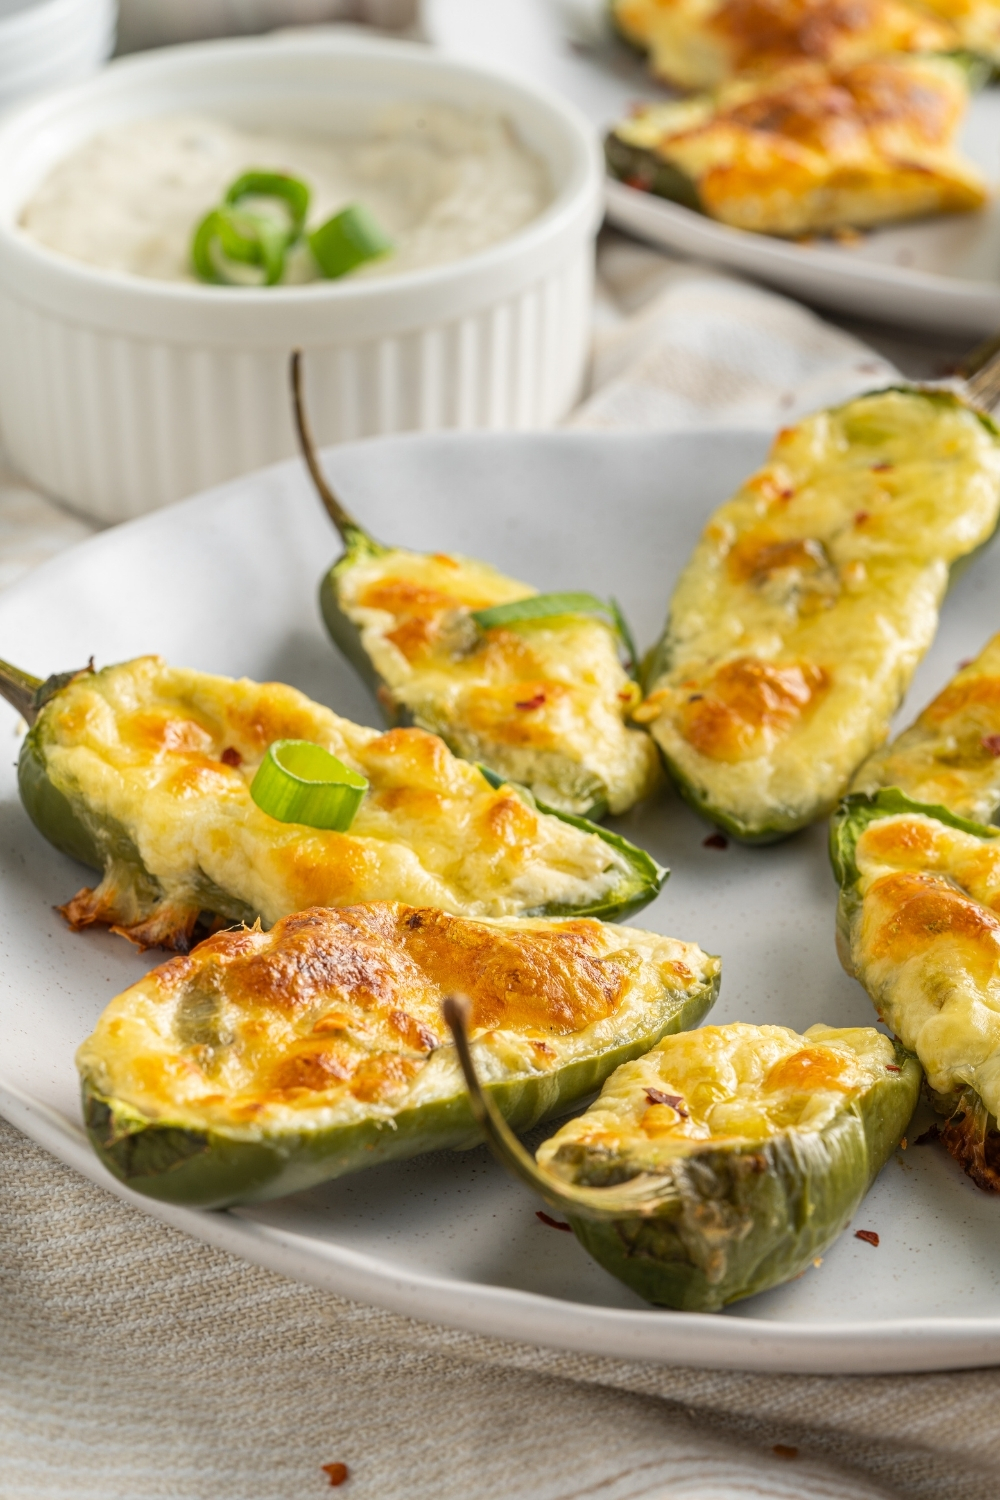 jalapeño poppers with golden crust on a plate